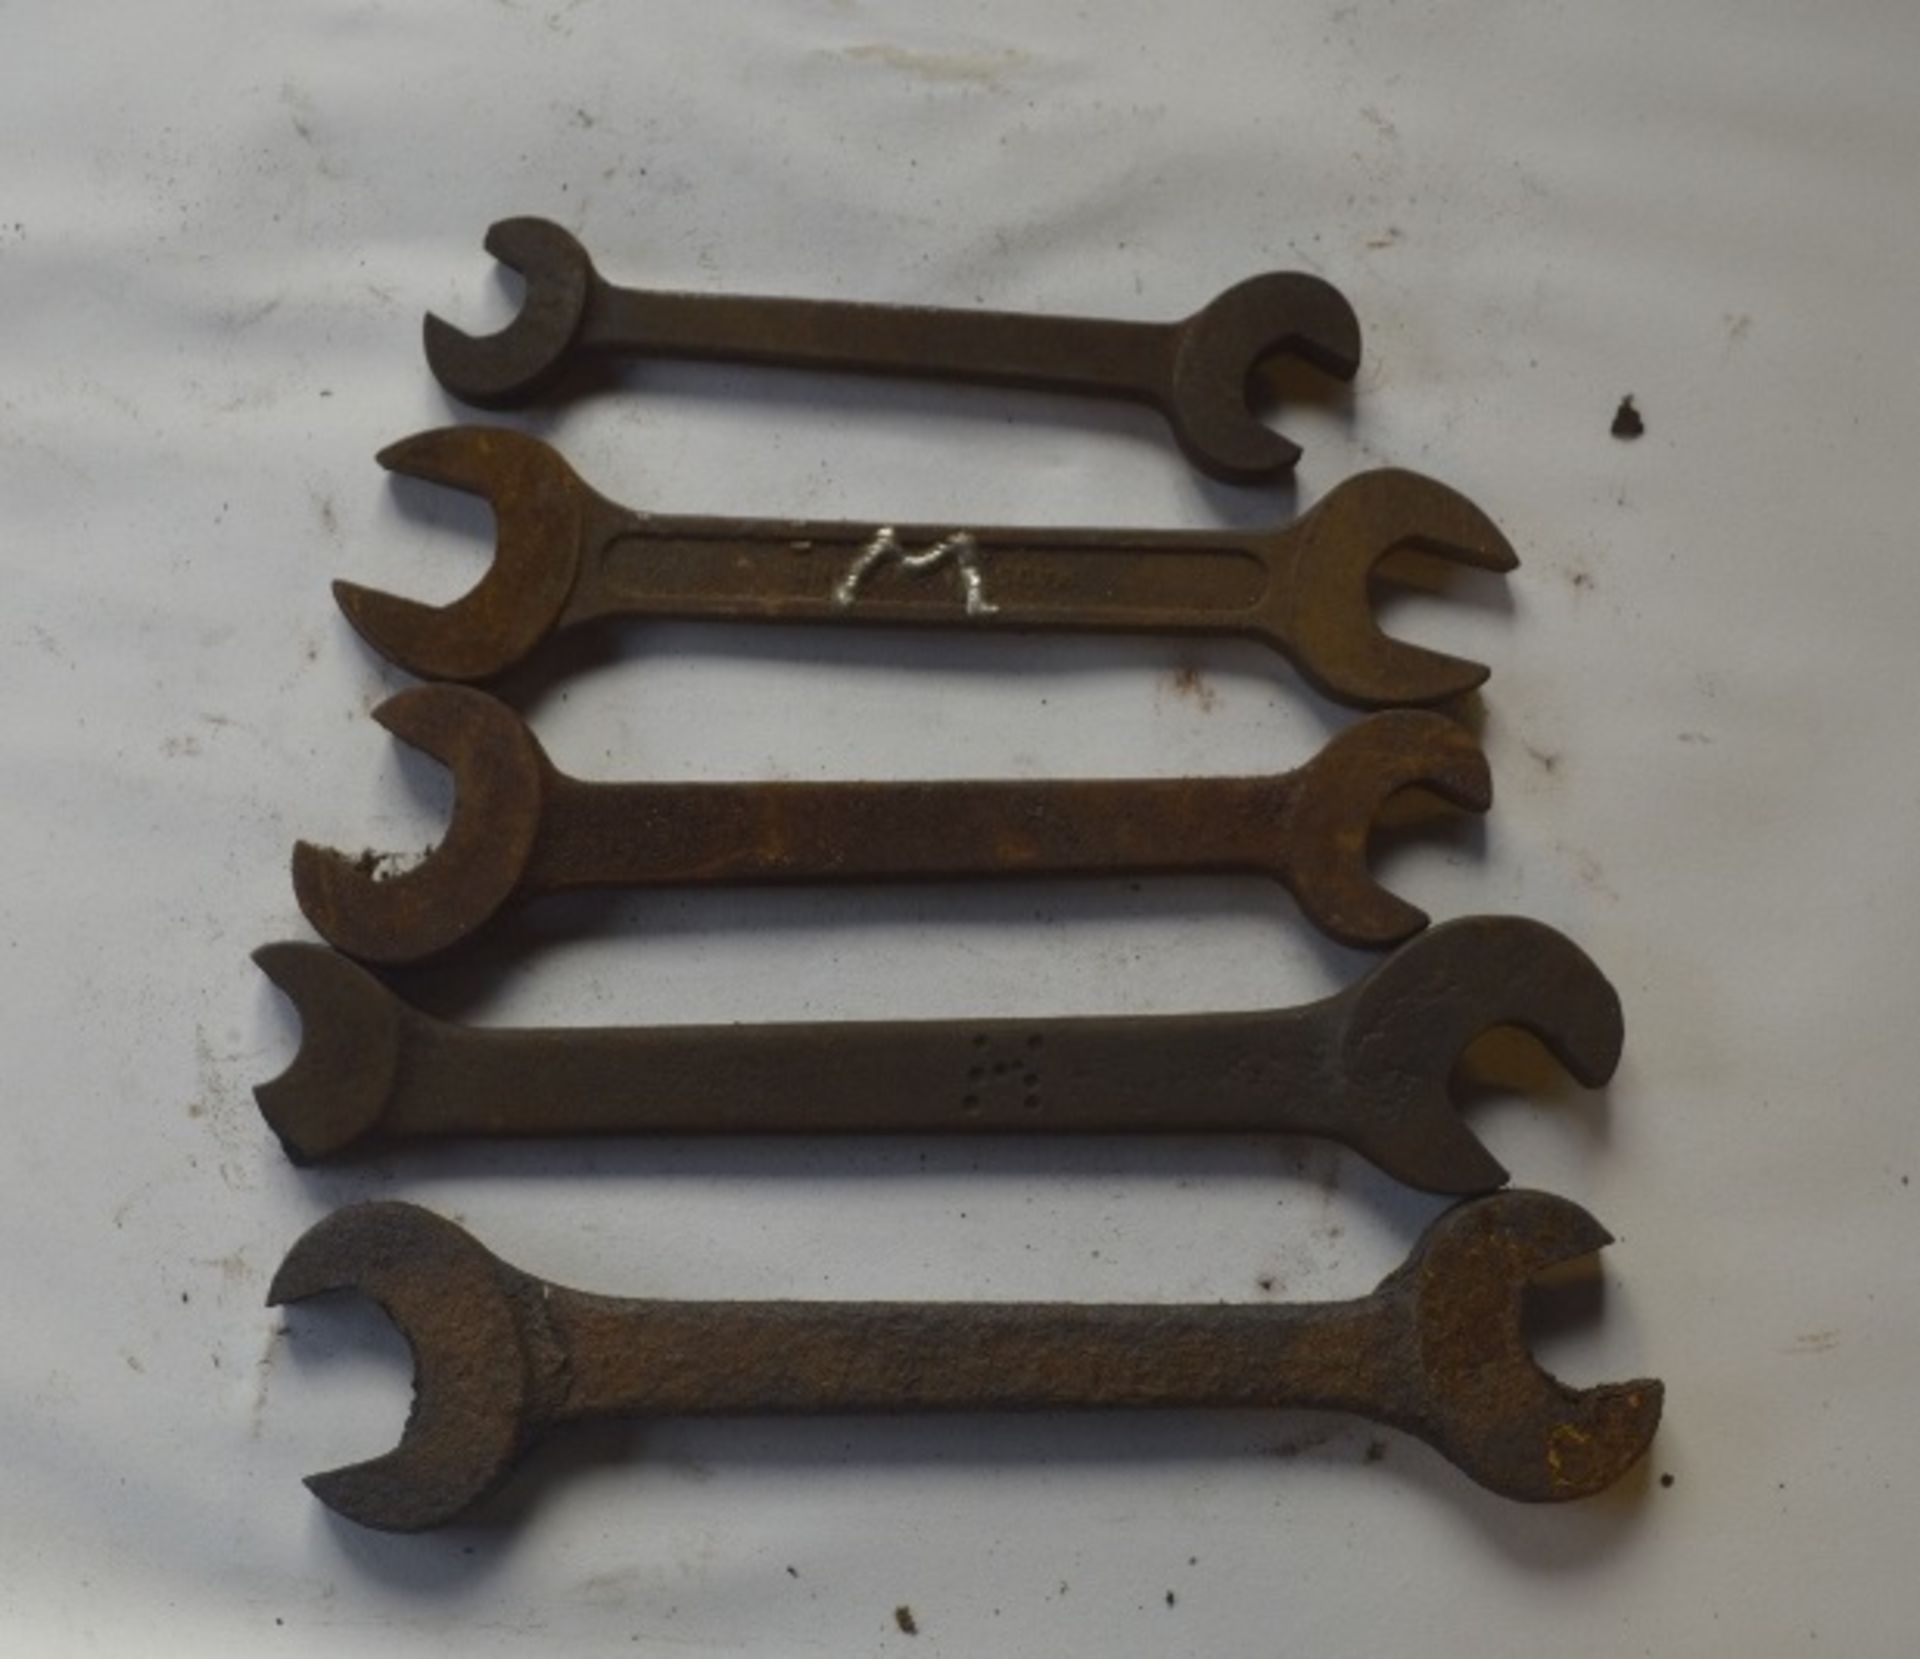 Five BSW - BSF spanners, length of longest approx. 12 1/2" (5).